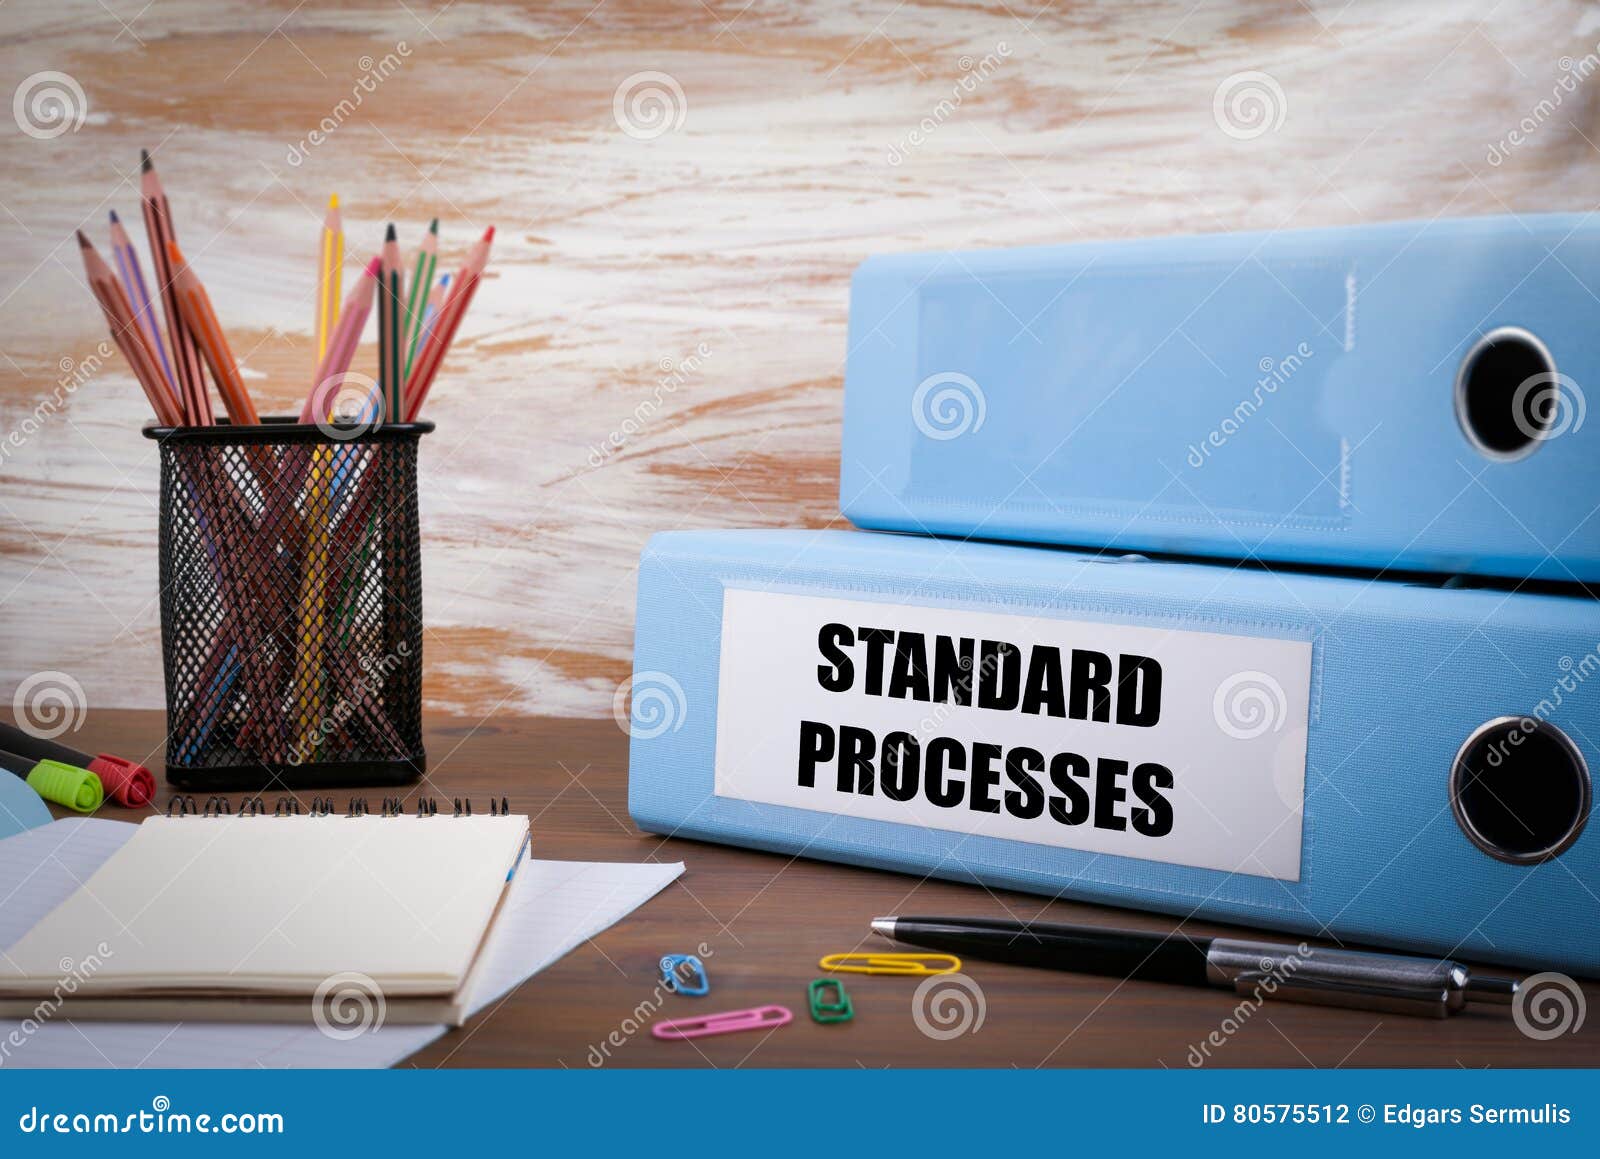 standard processes, office binder on wooden desk. on the table c